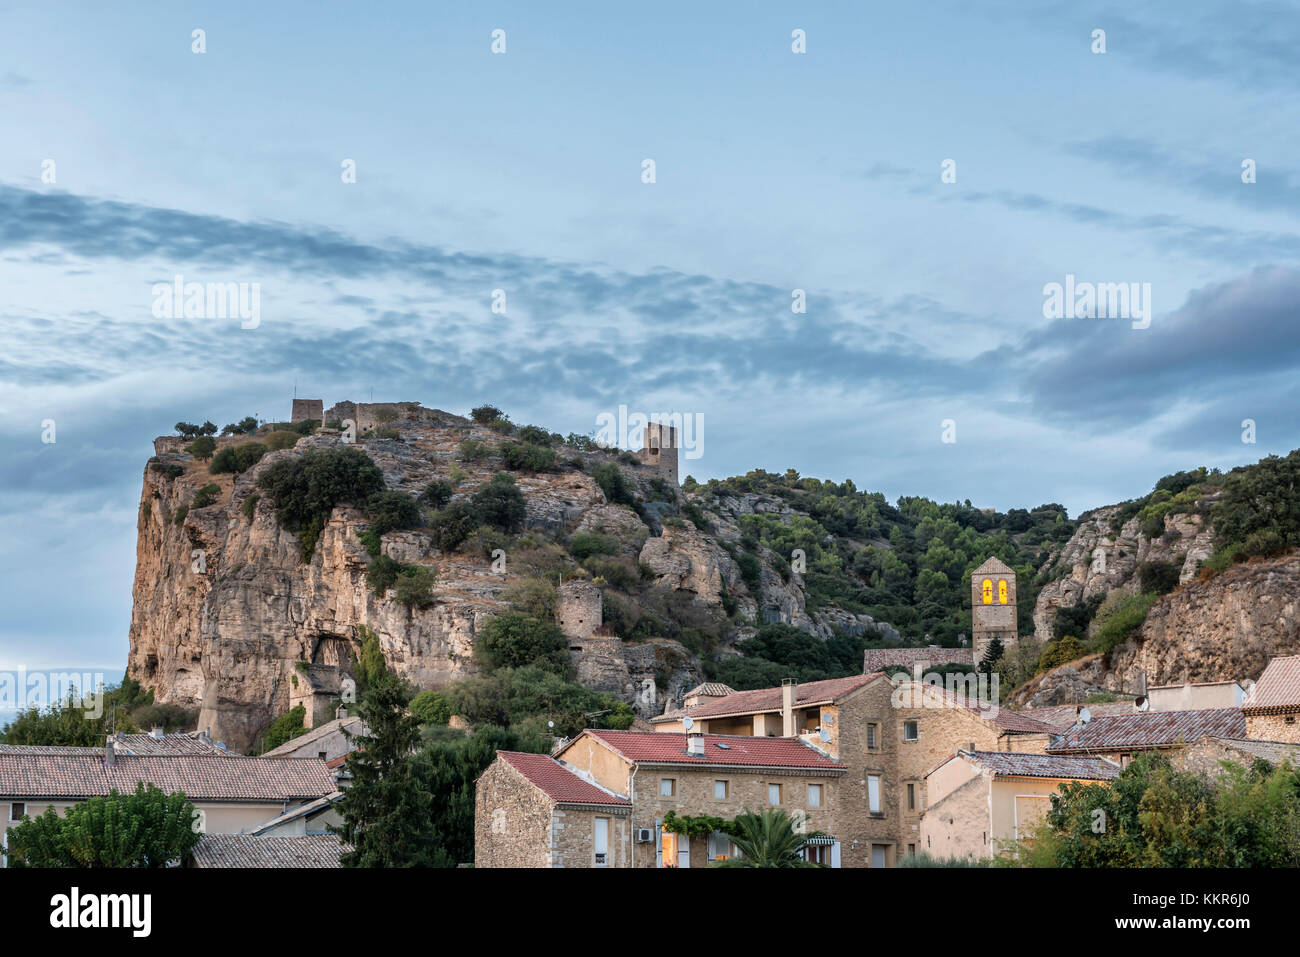 Mornas, Vaucluse, France, view of the Old Town of Mornas with the castle Monars on the limestone massif, Département Vaucluse in the region of Provence-Alpes-Côte d'Azur, Arrondissement Carpentras, canton of Bollène. Stock Photo